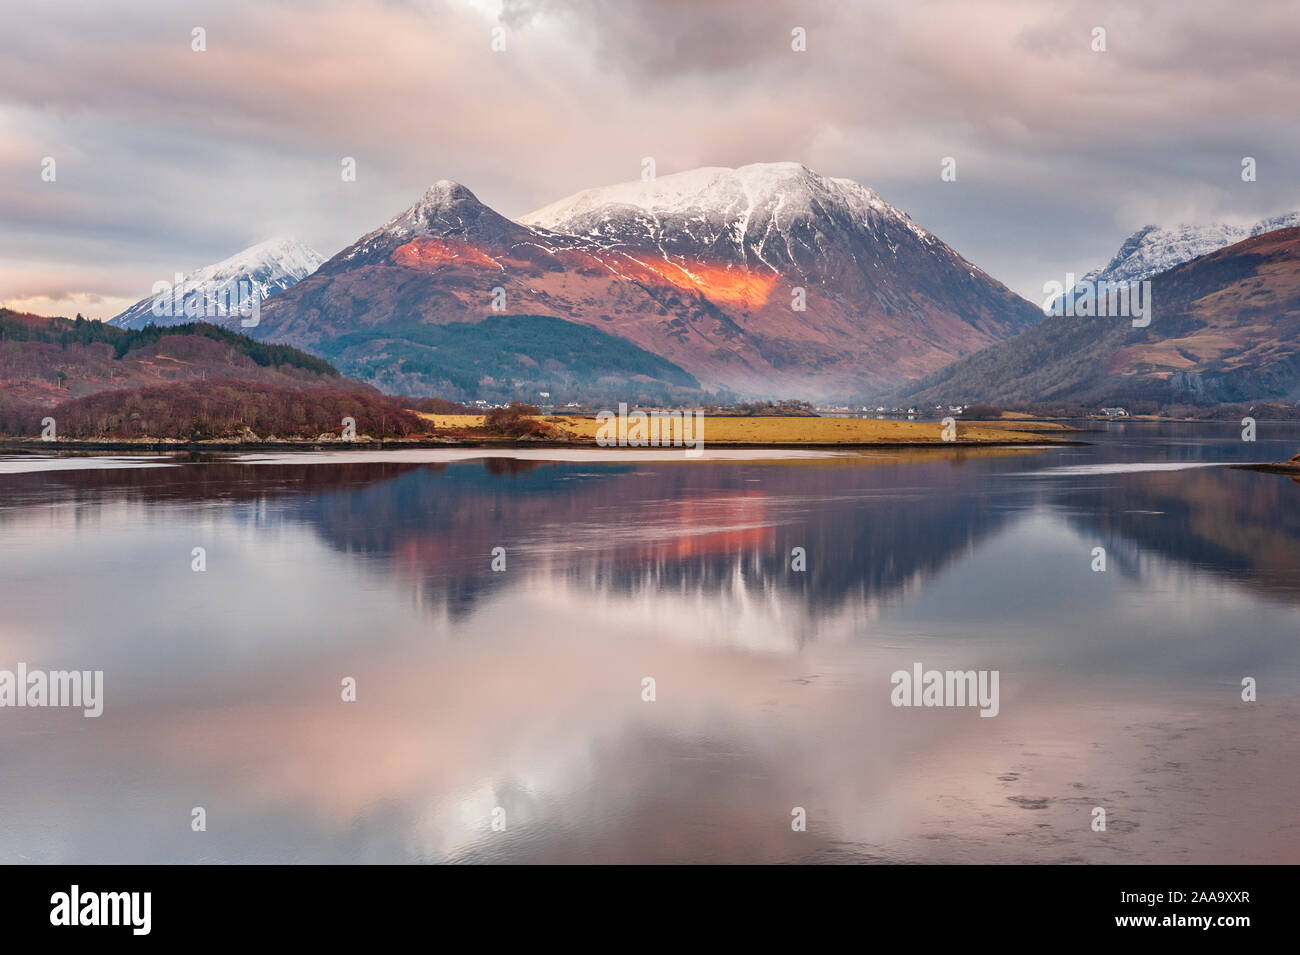 North West Scotland landscape - Loch Leven in the Scottish Highlands looking towards the Pap of Glen Coe and Glencoe village from Ballachulish Stock Photo